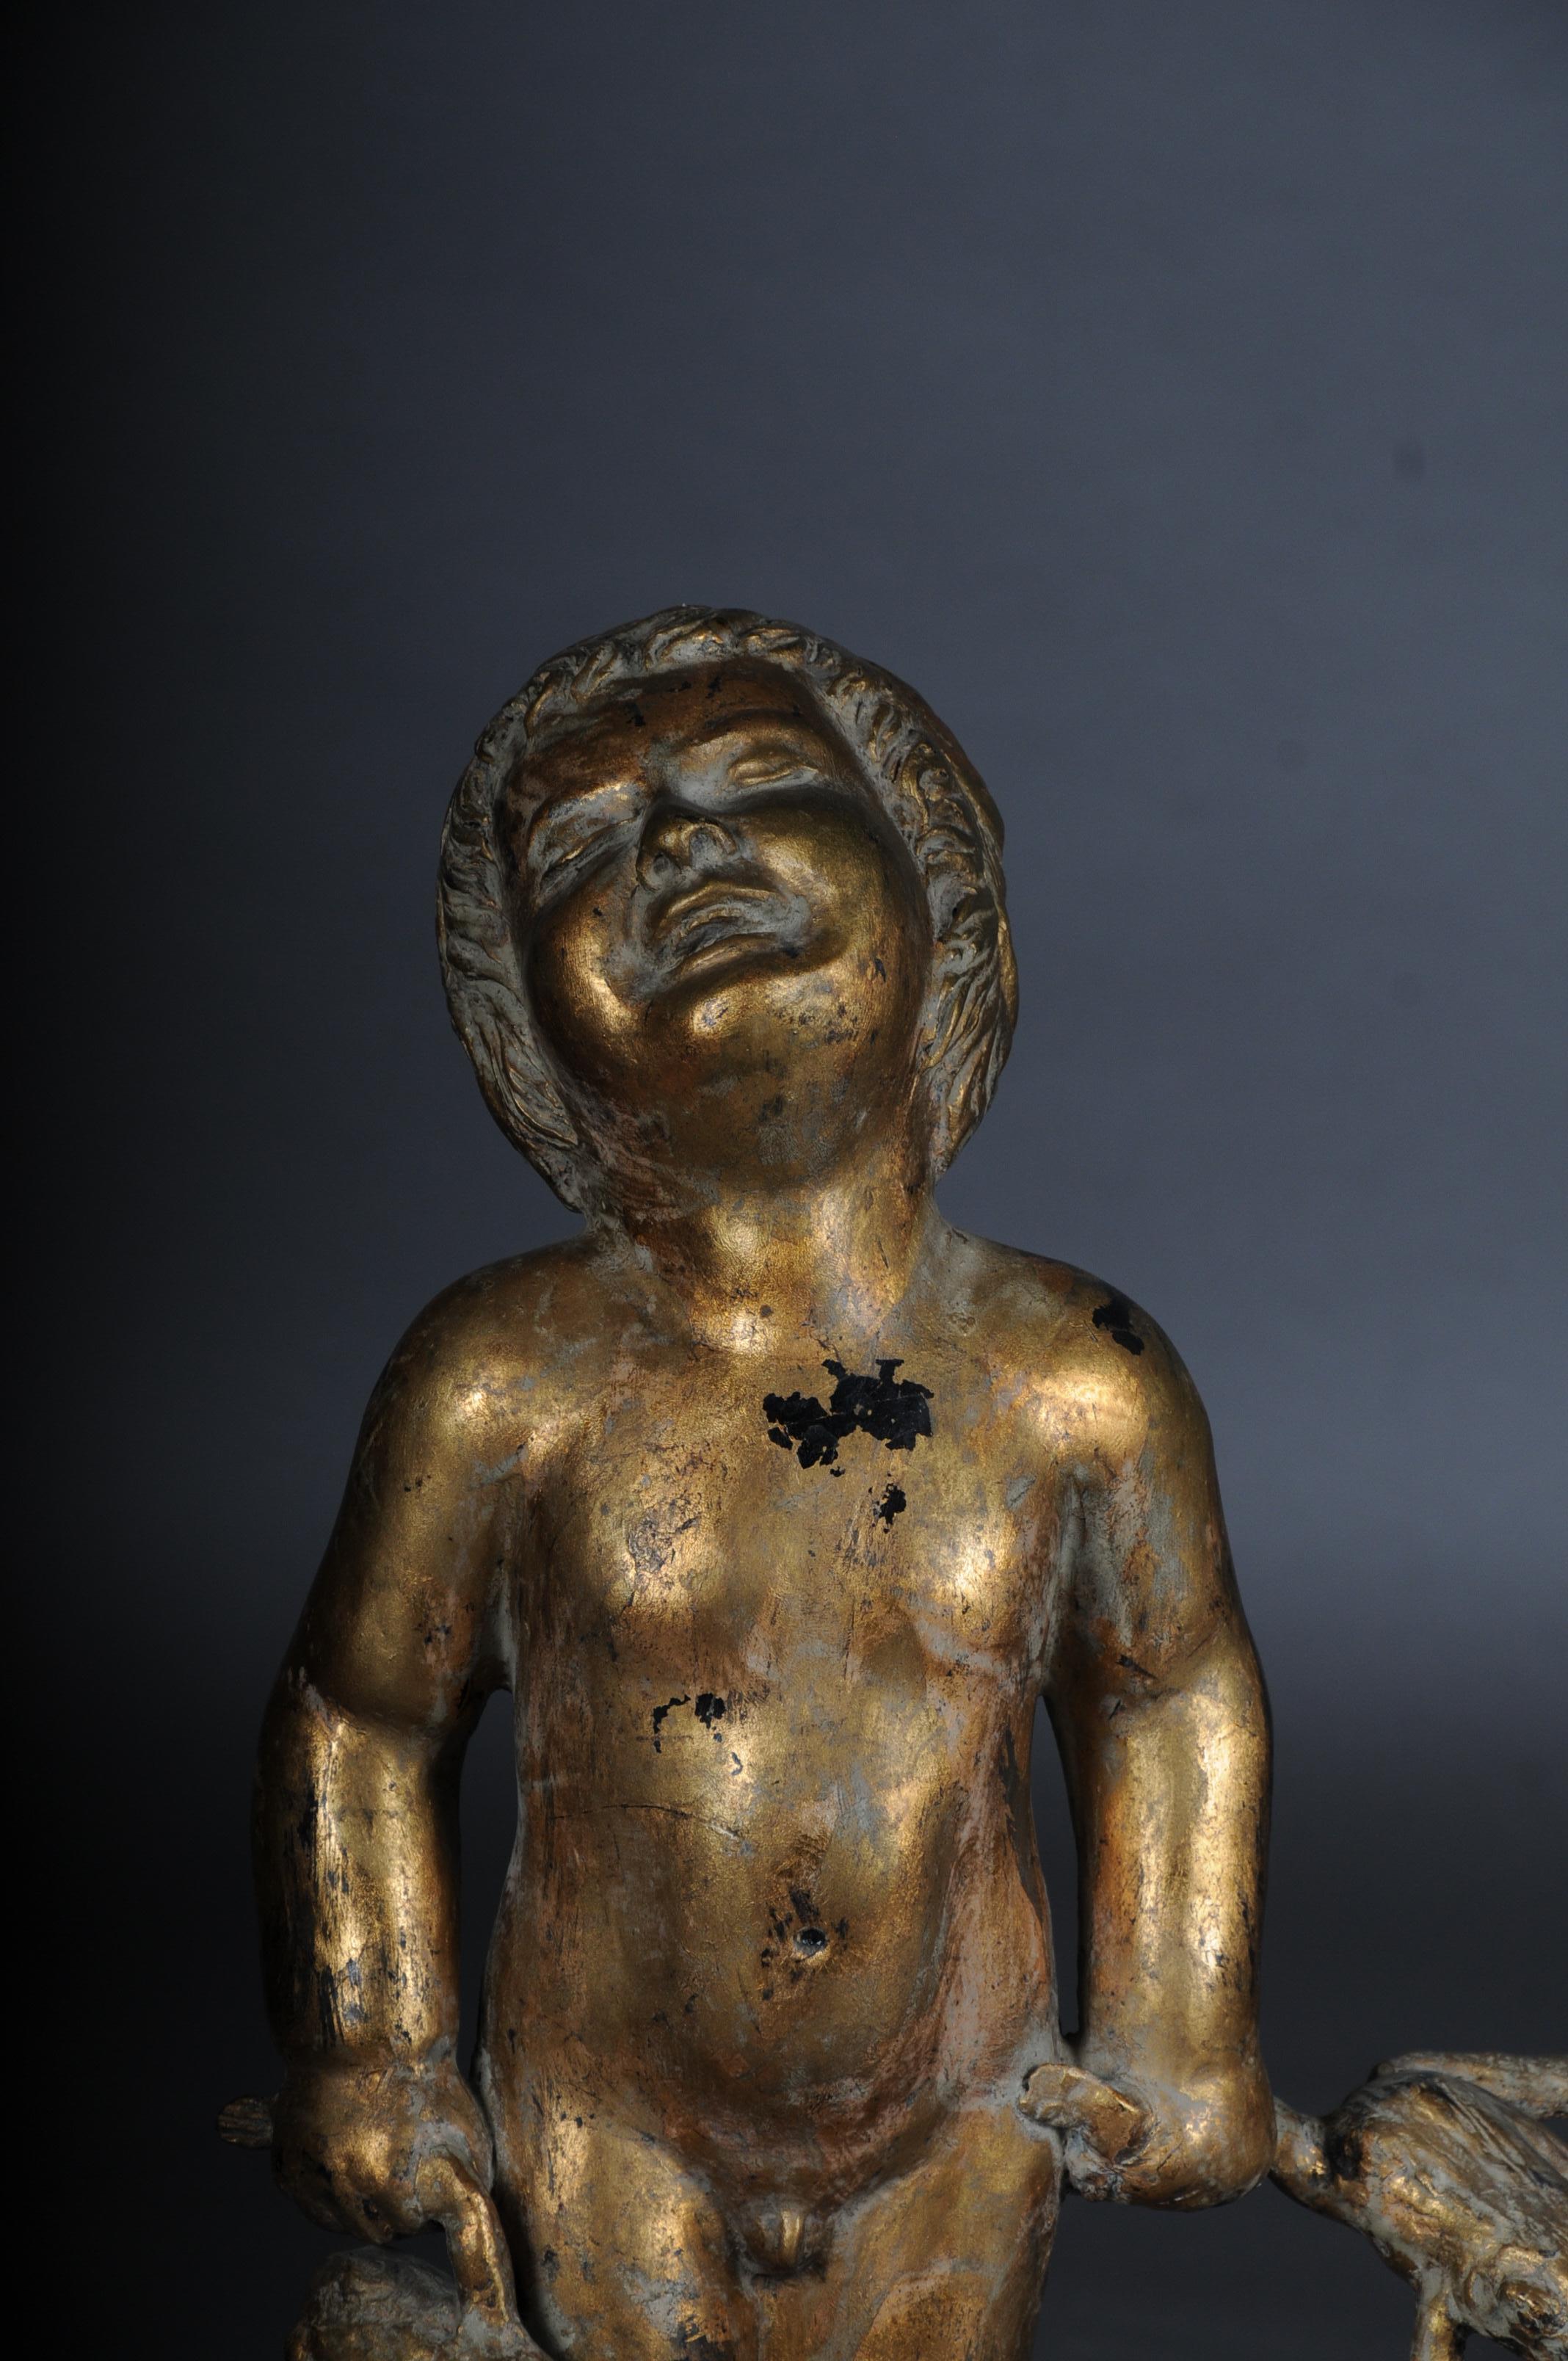 20th Century Unique sculpture of a putto with frogs, gold

Cast zinc with patented gilding, a naked, laughing putto standing on a round ball, holding 2 frogs by the frog's legs. Octagonal base also with some frogs.